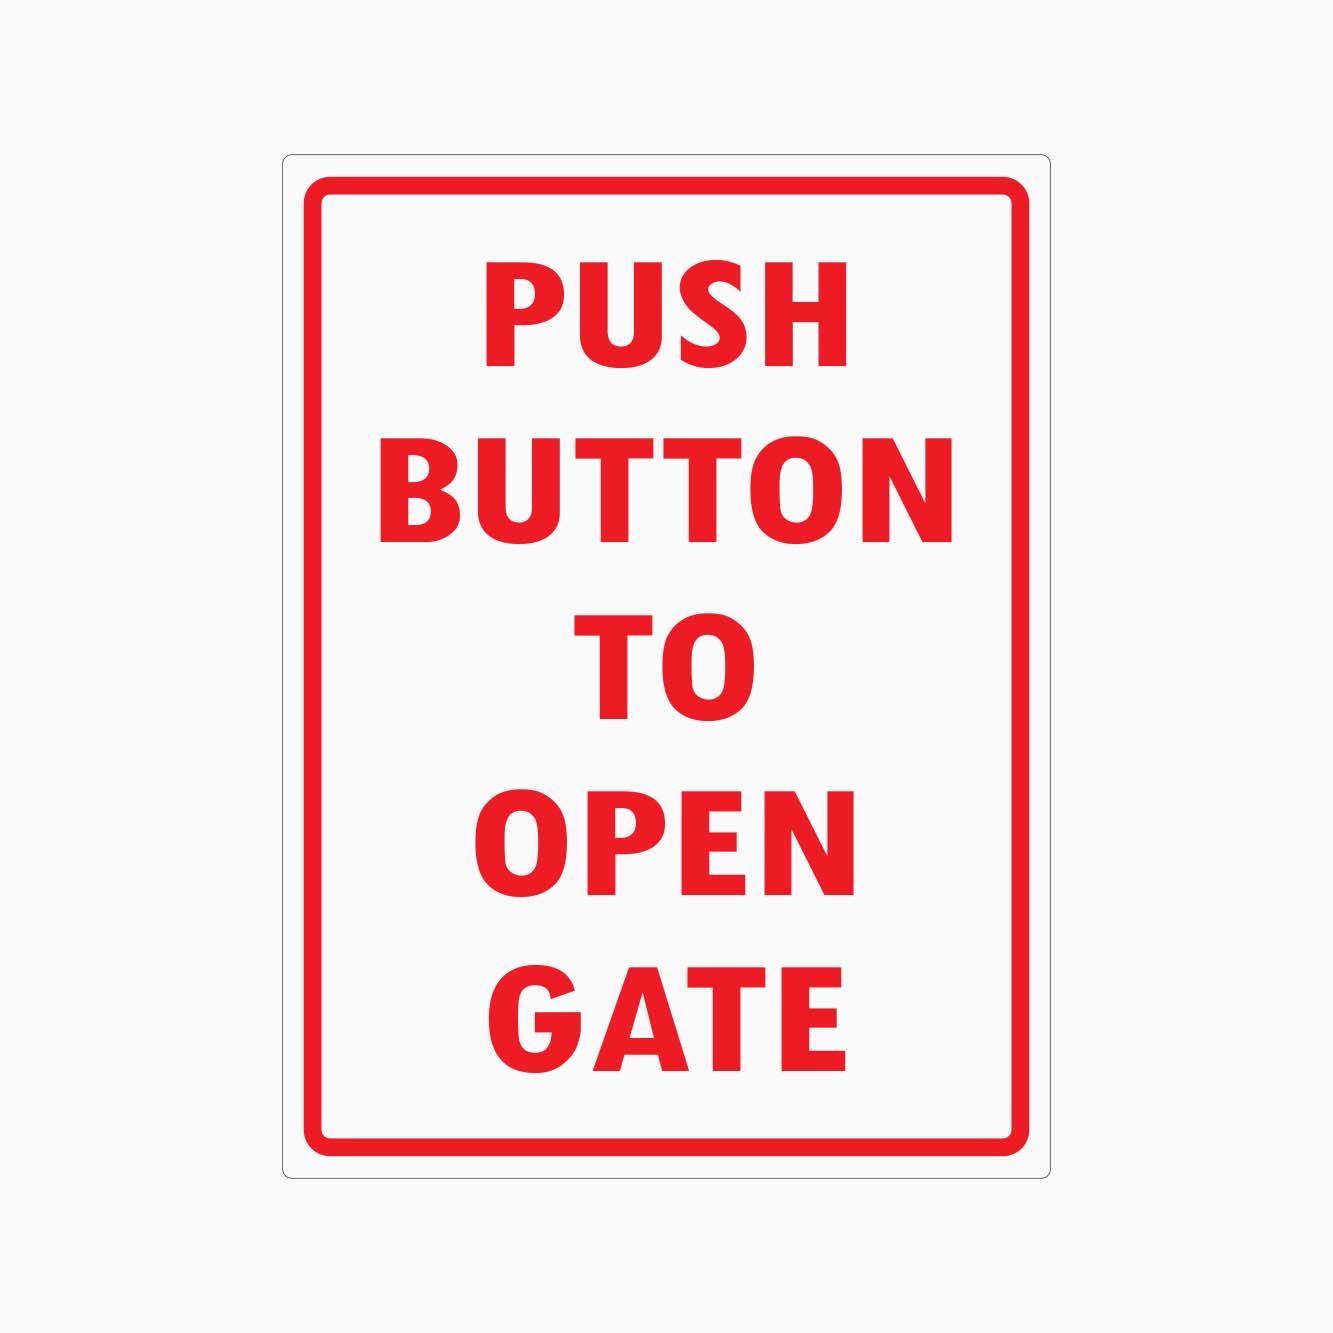 PUSH BUTTON TO OPEN GATE SIGN